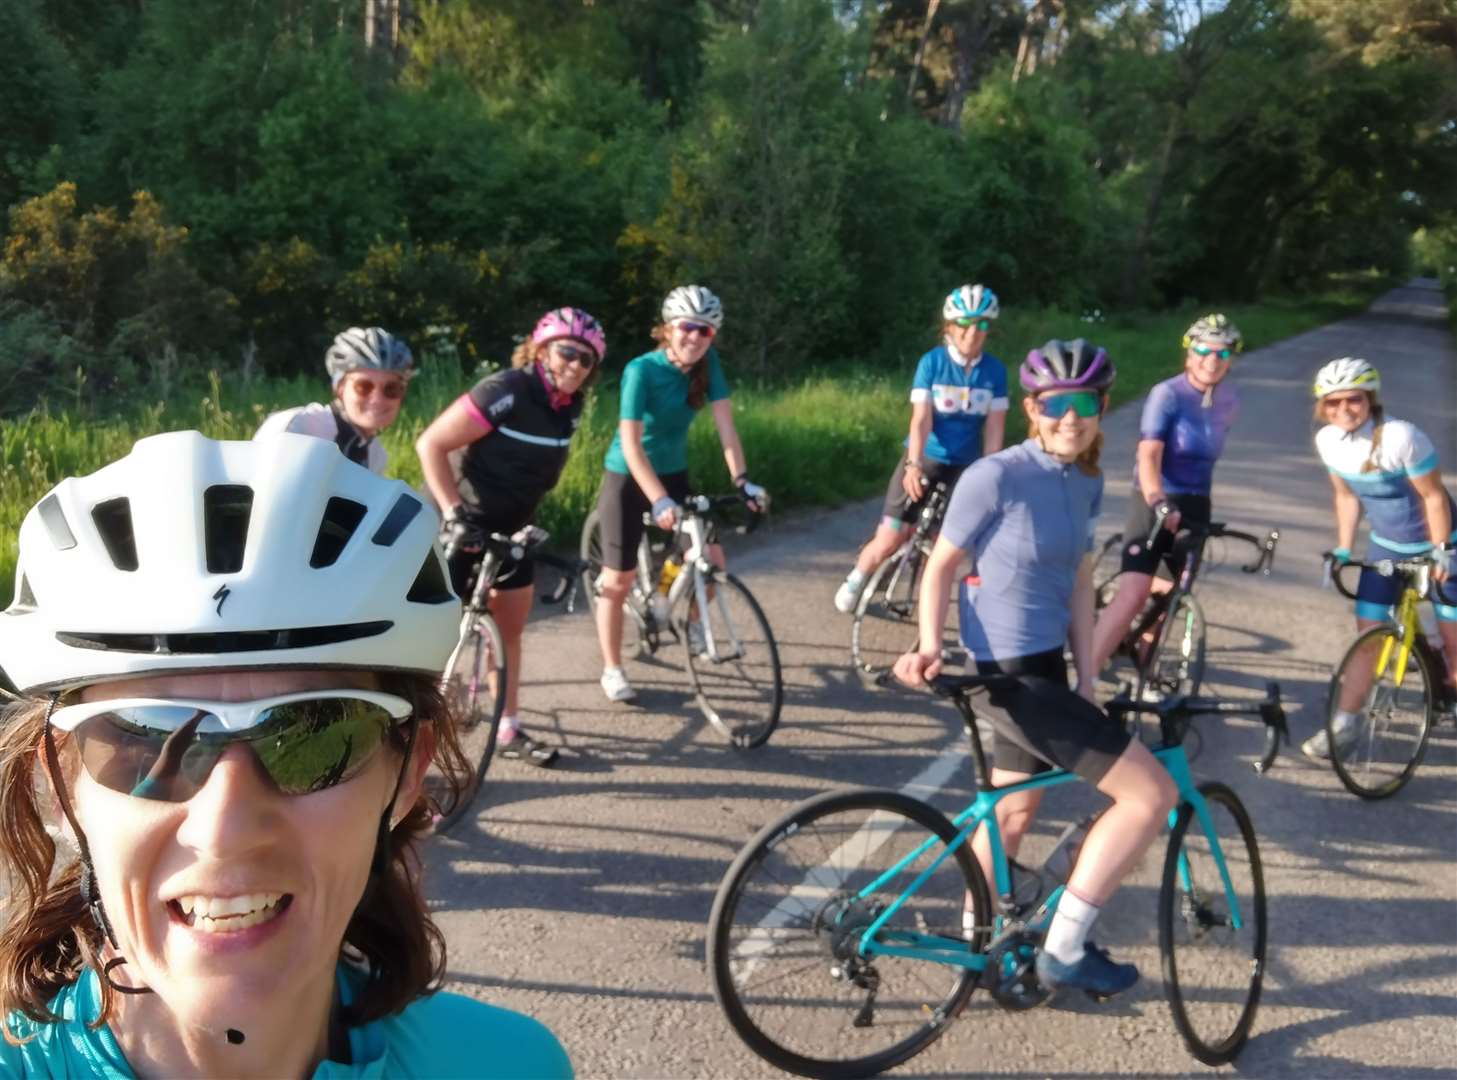 Women's rides will take place on the Wednesday night.